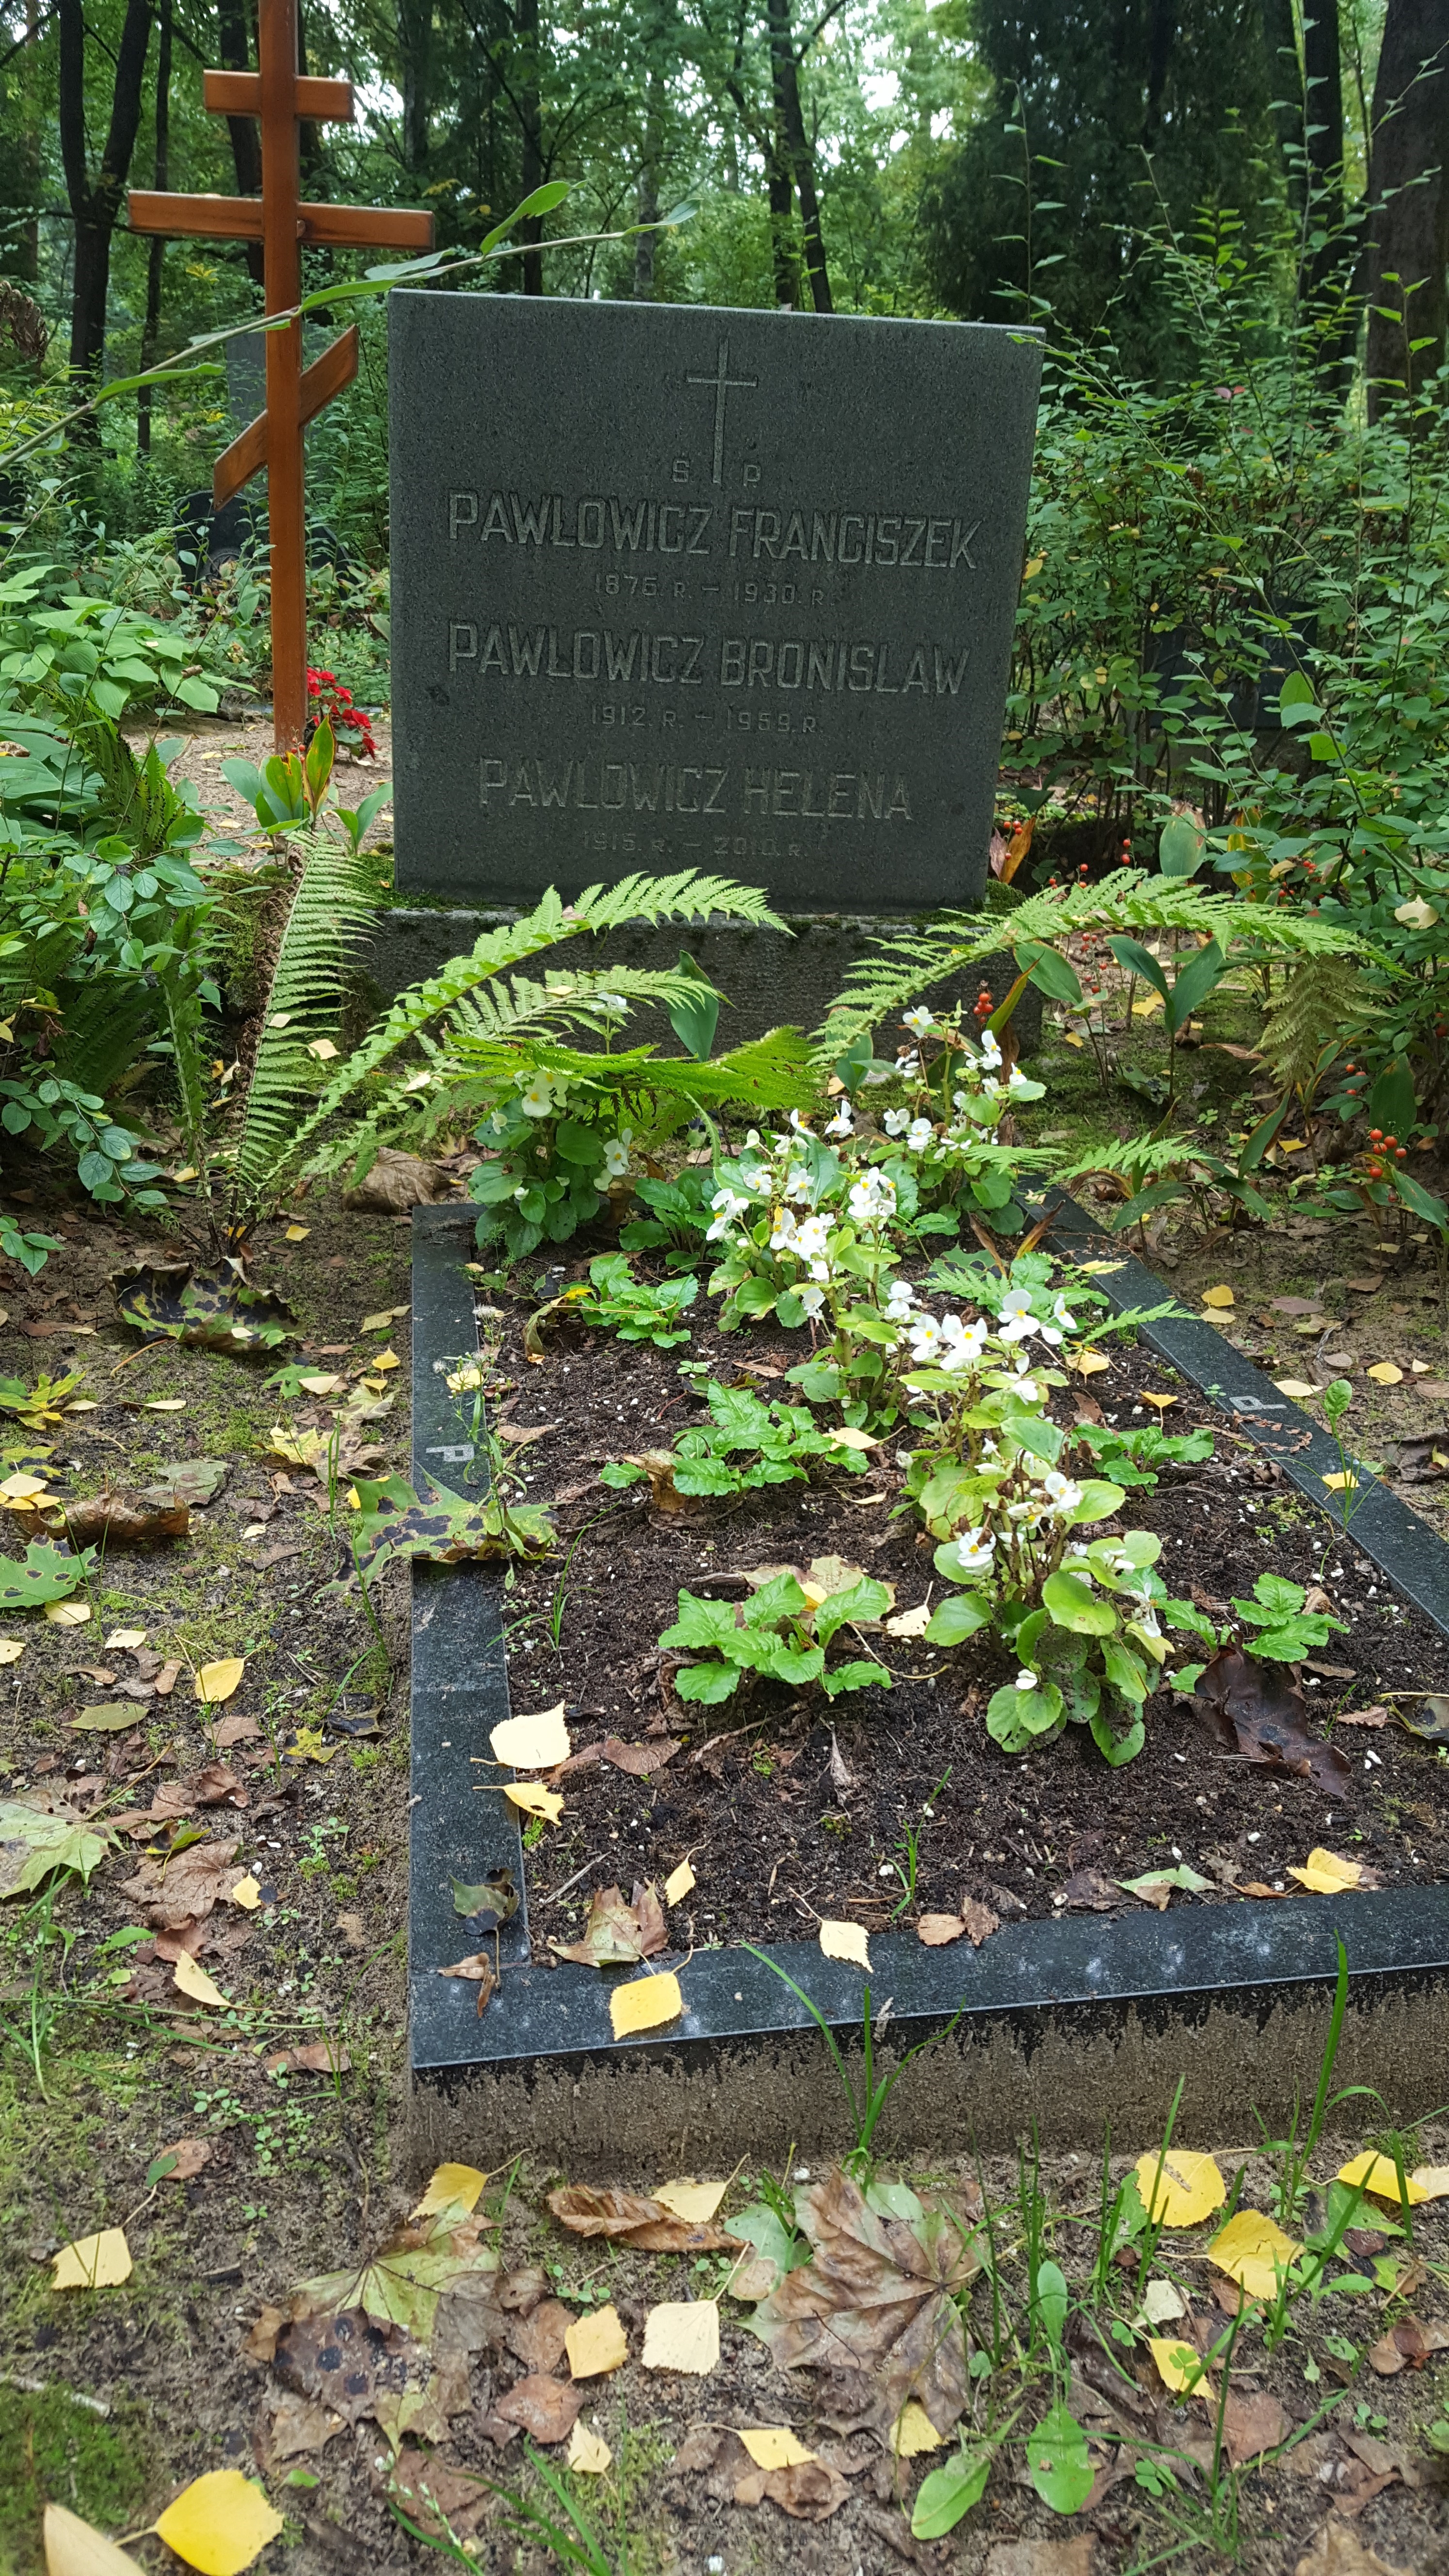 Tombstone of Bronislaw, Francis, Helena Pavlovich, St Michael's cemetery in Riga, as of 2021.